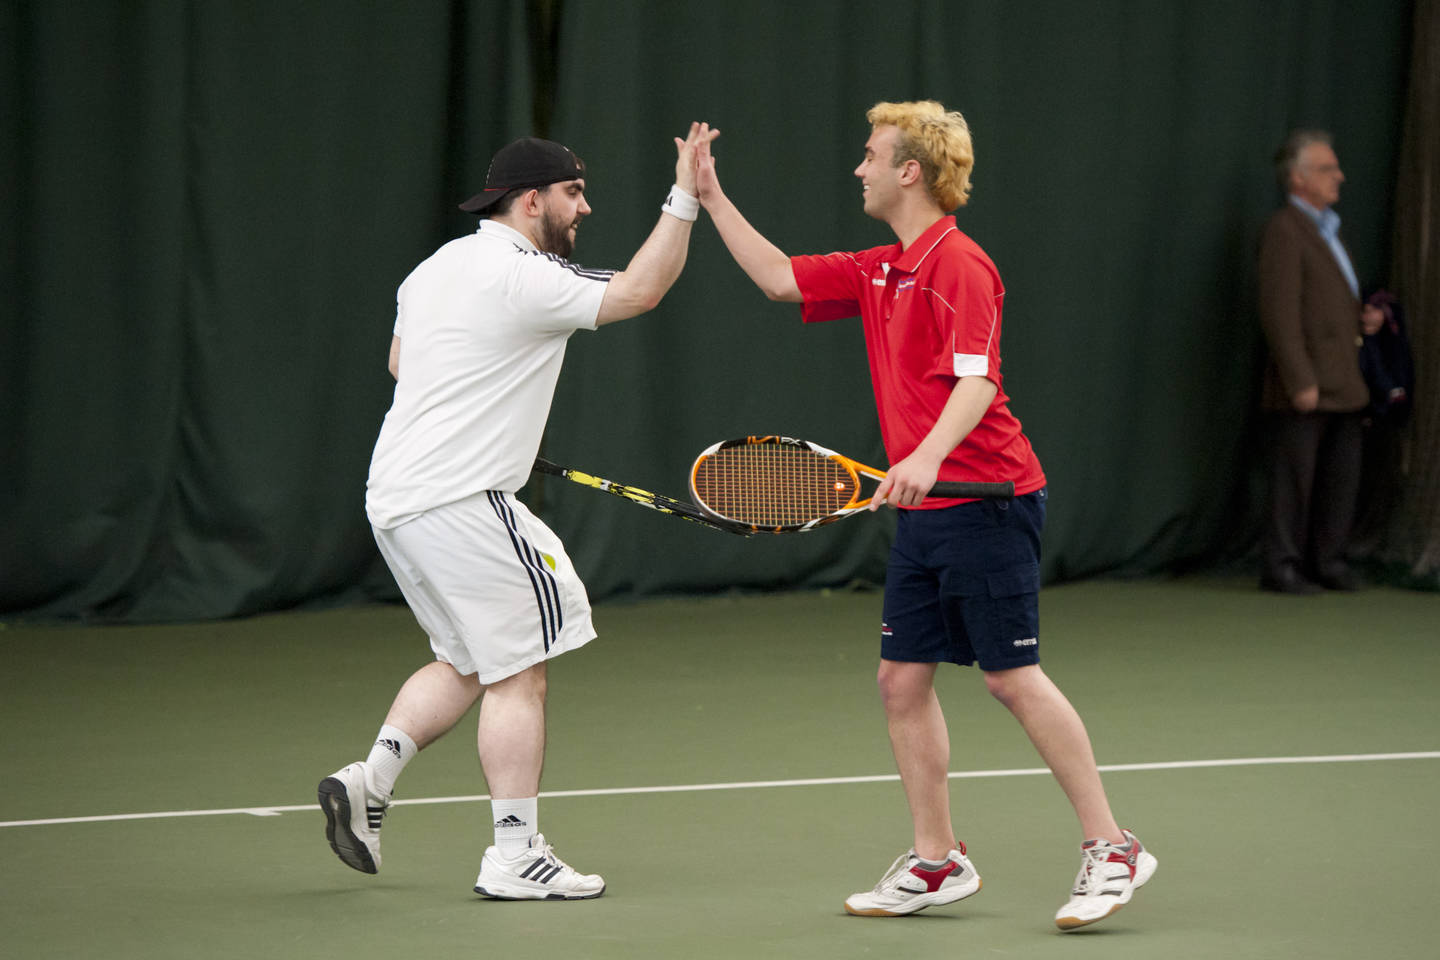 Tennis for people with learning disability